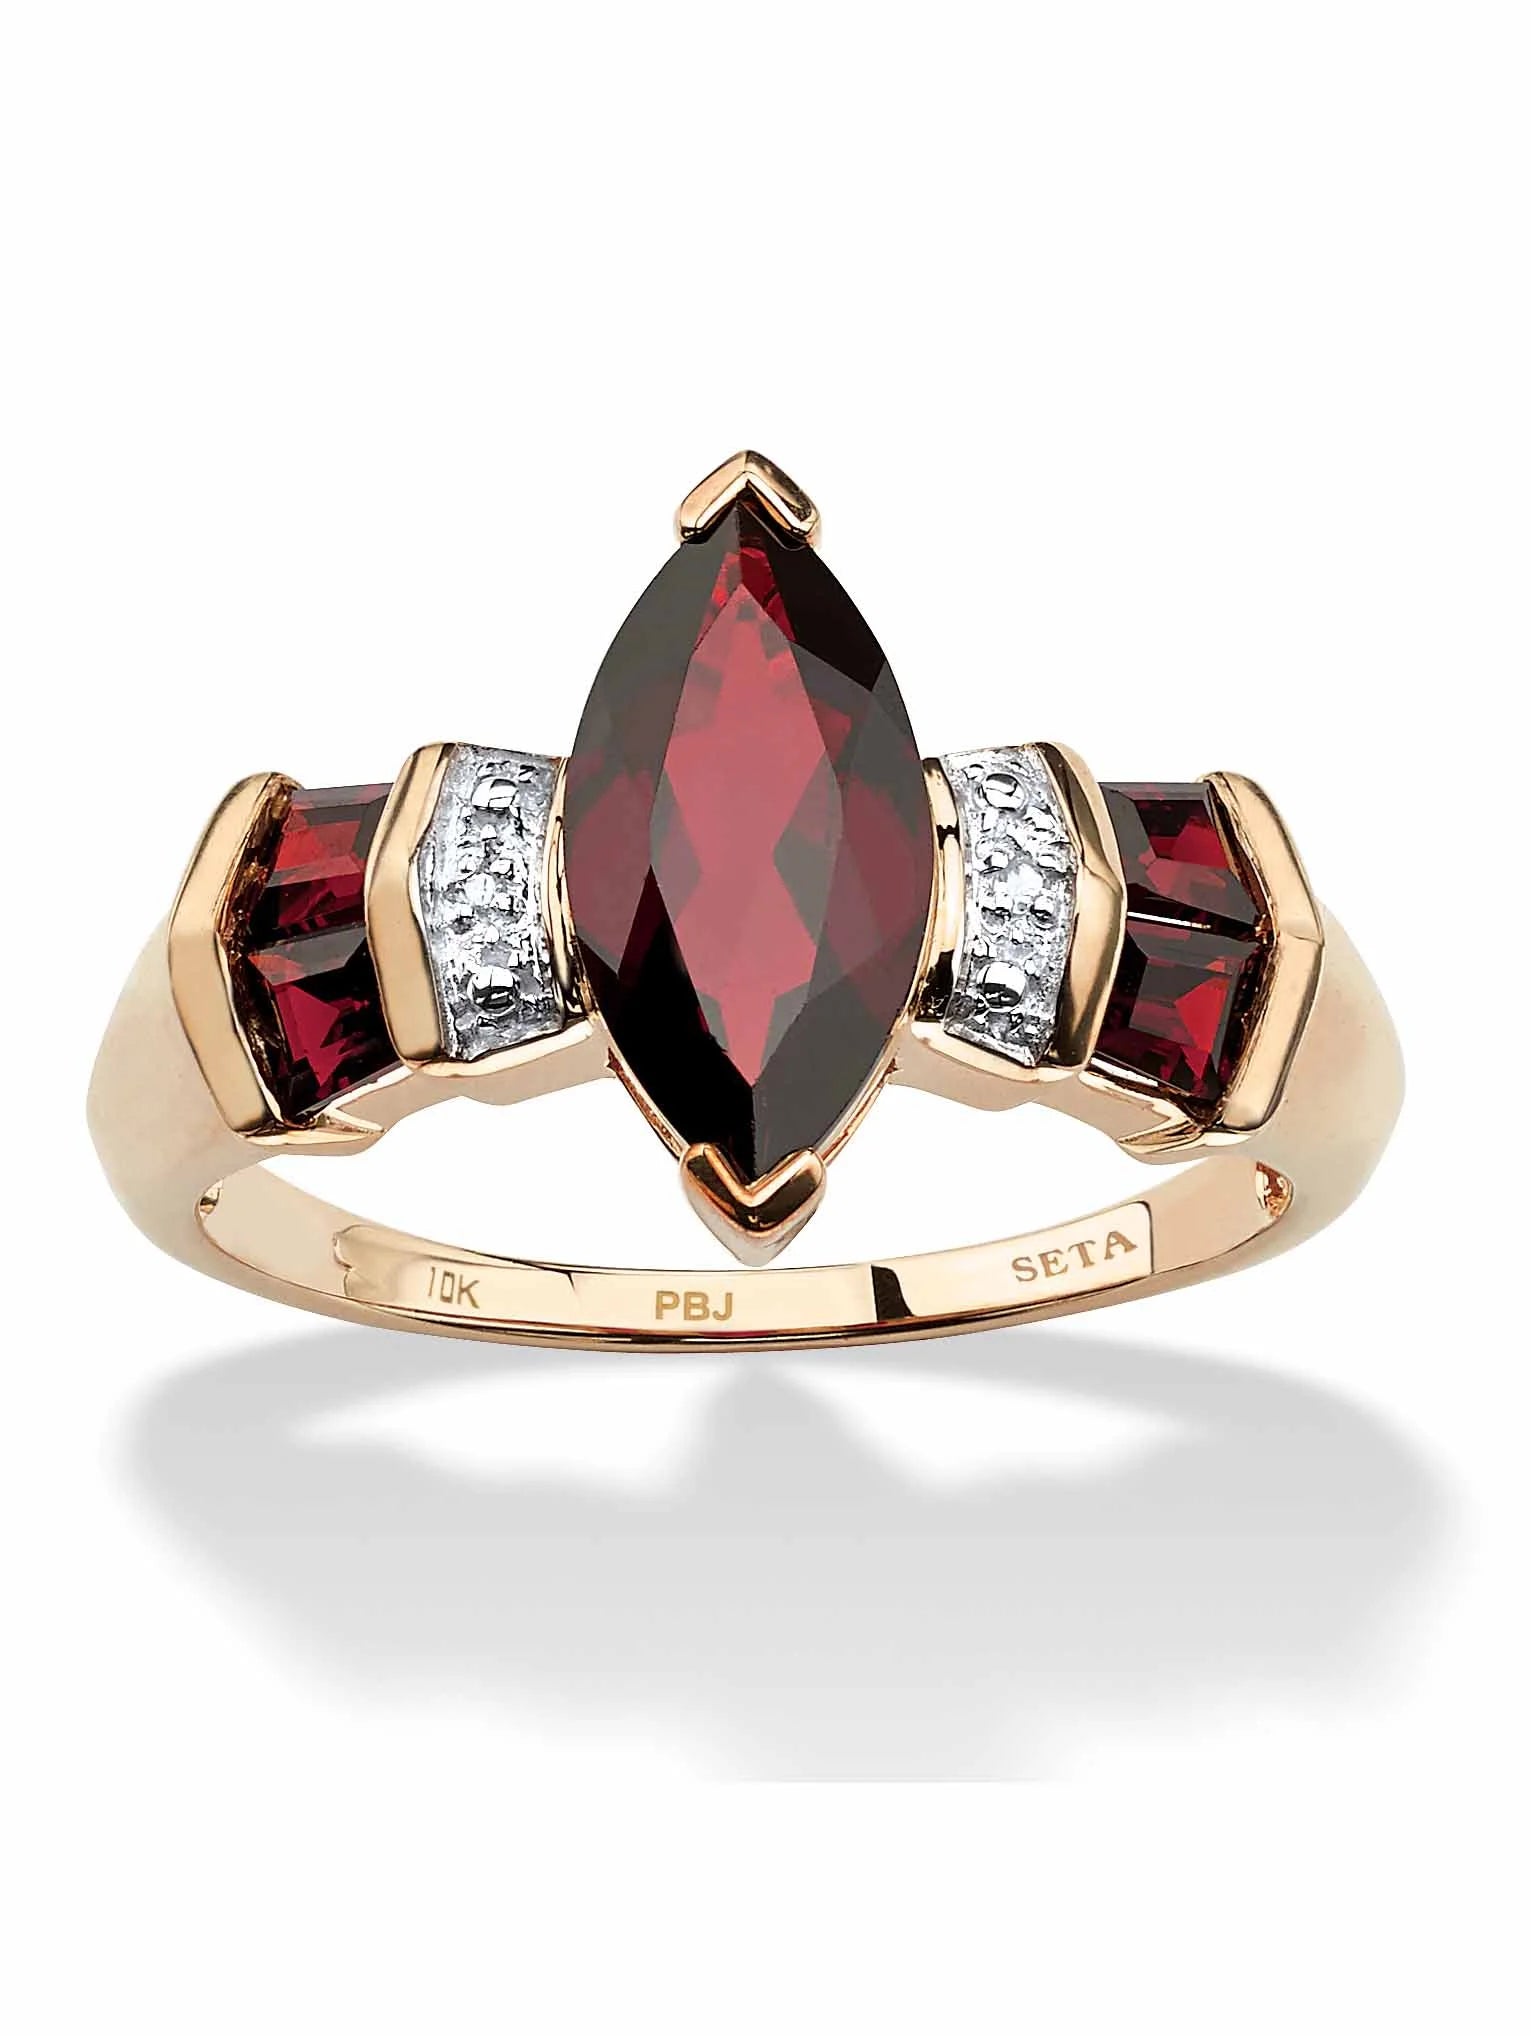 2.84 TCW Marquise-Cut Garnet and Diamond Accent Ring in Solid 10K Gold